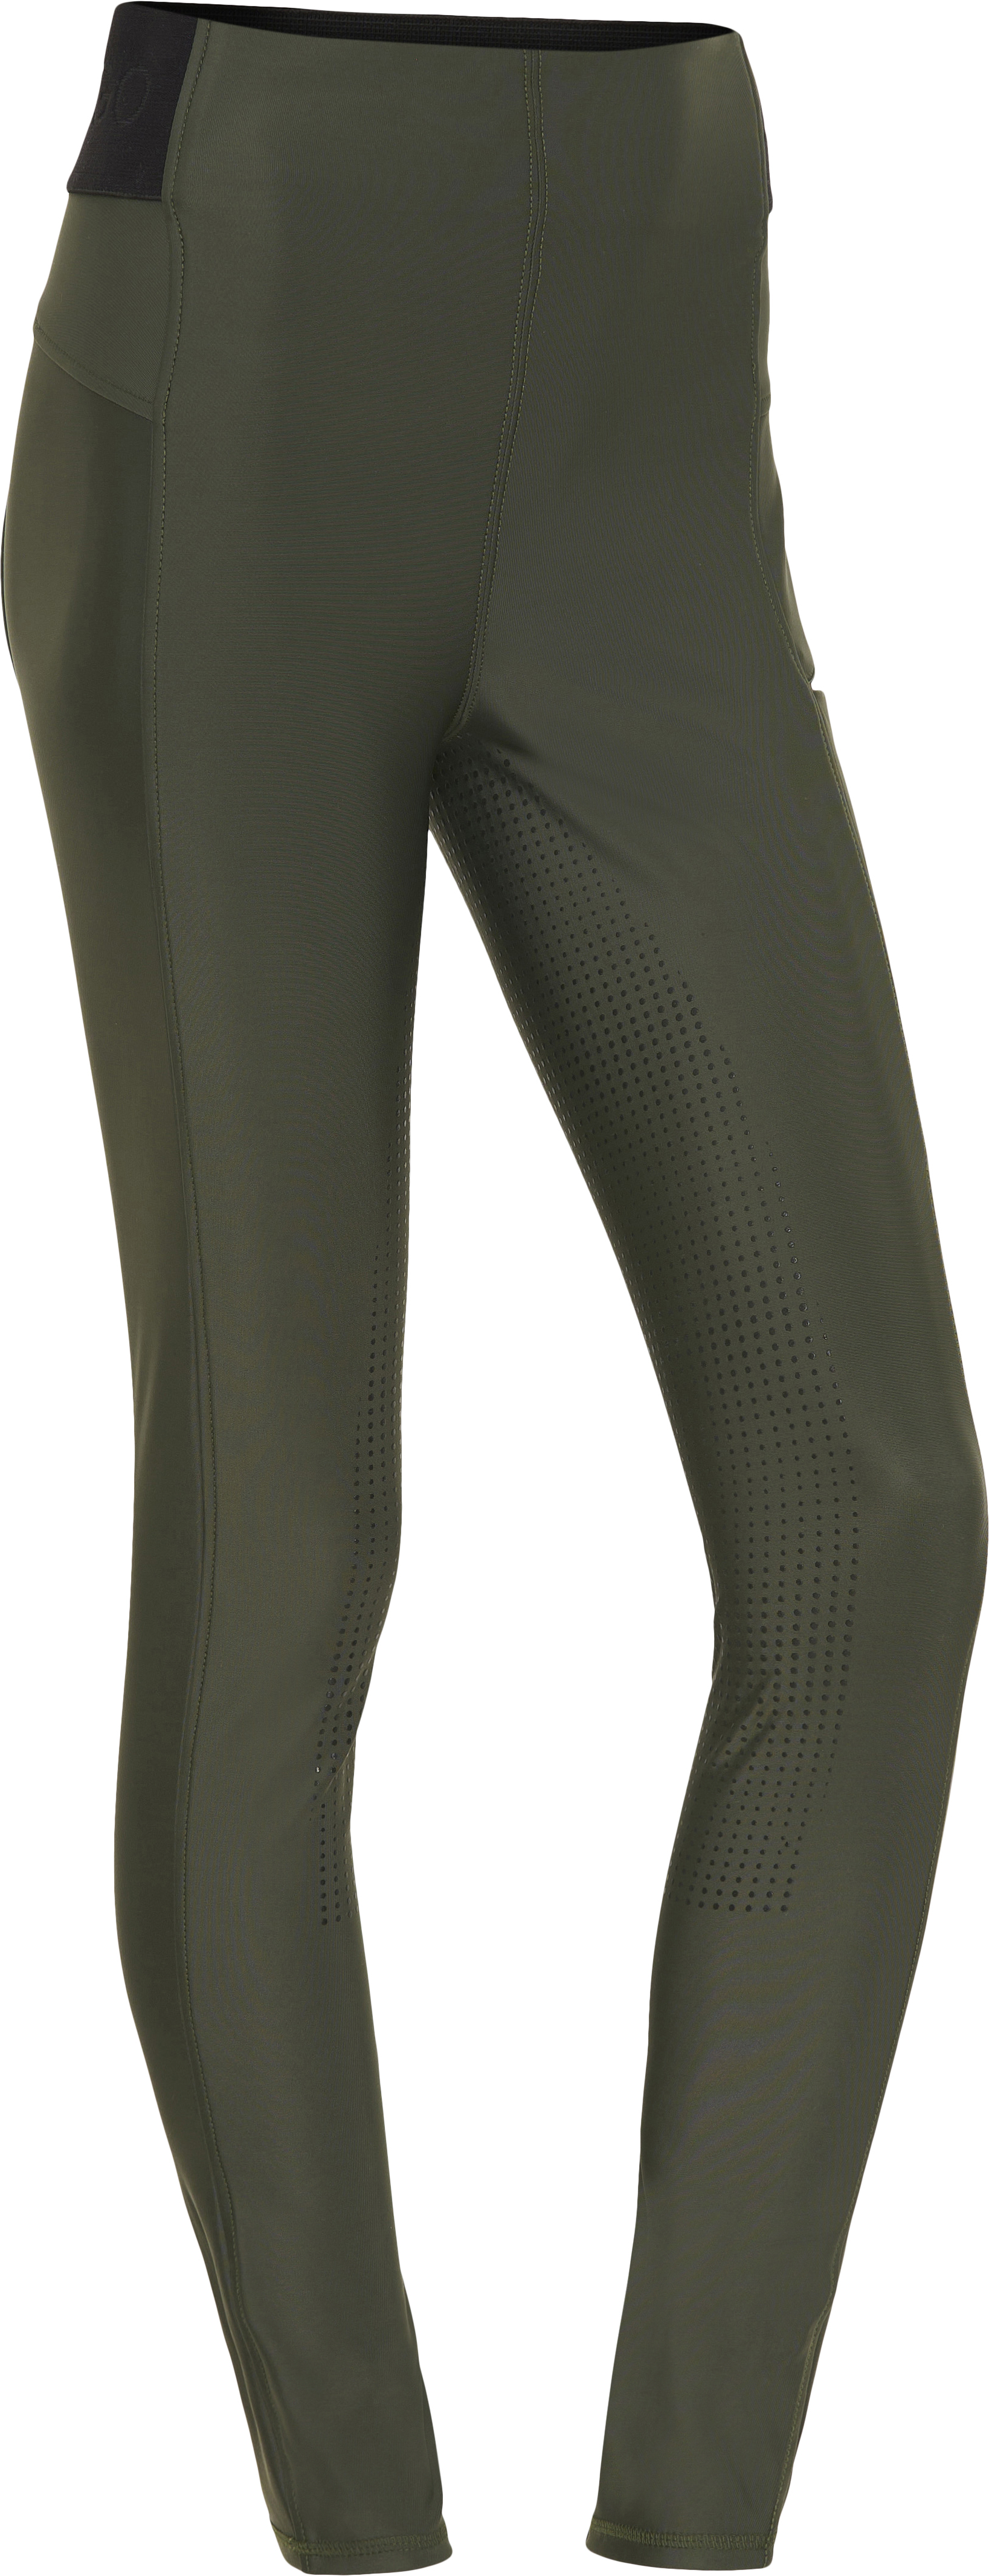 CATAGO Aroy Fullgrip High Waisted Tights Forest (3XL), Catago